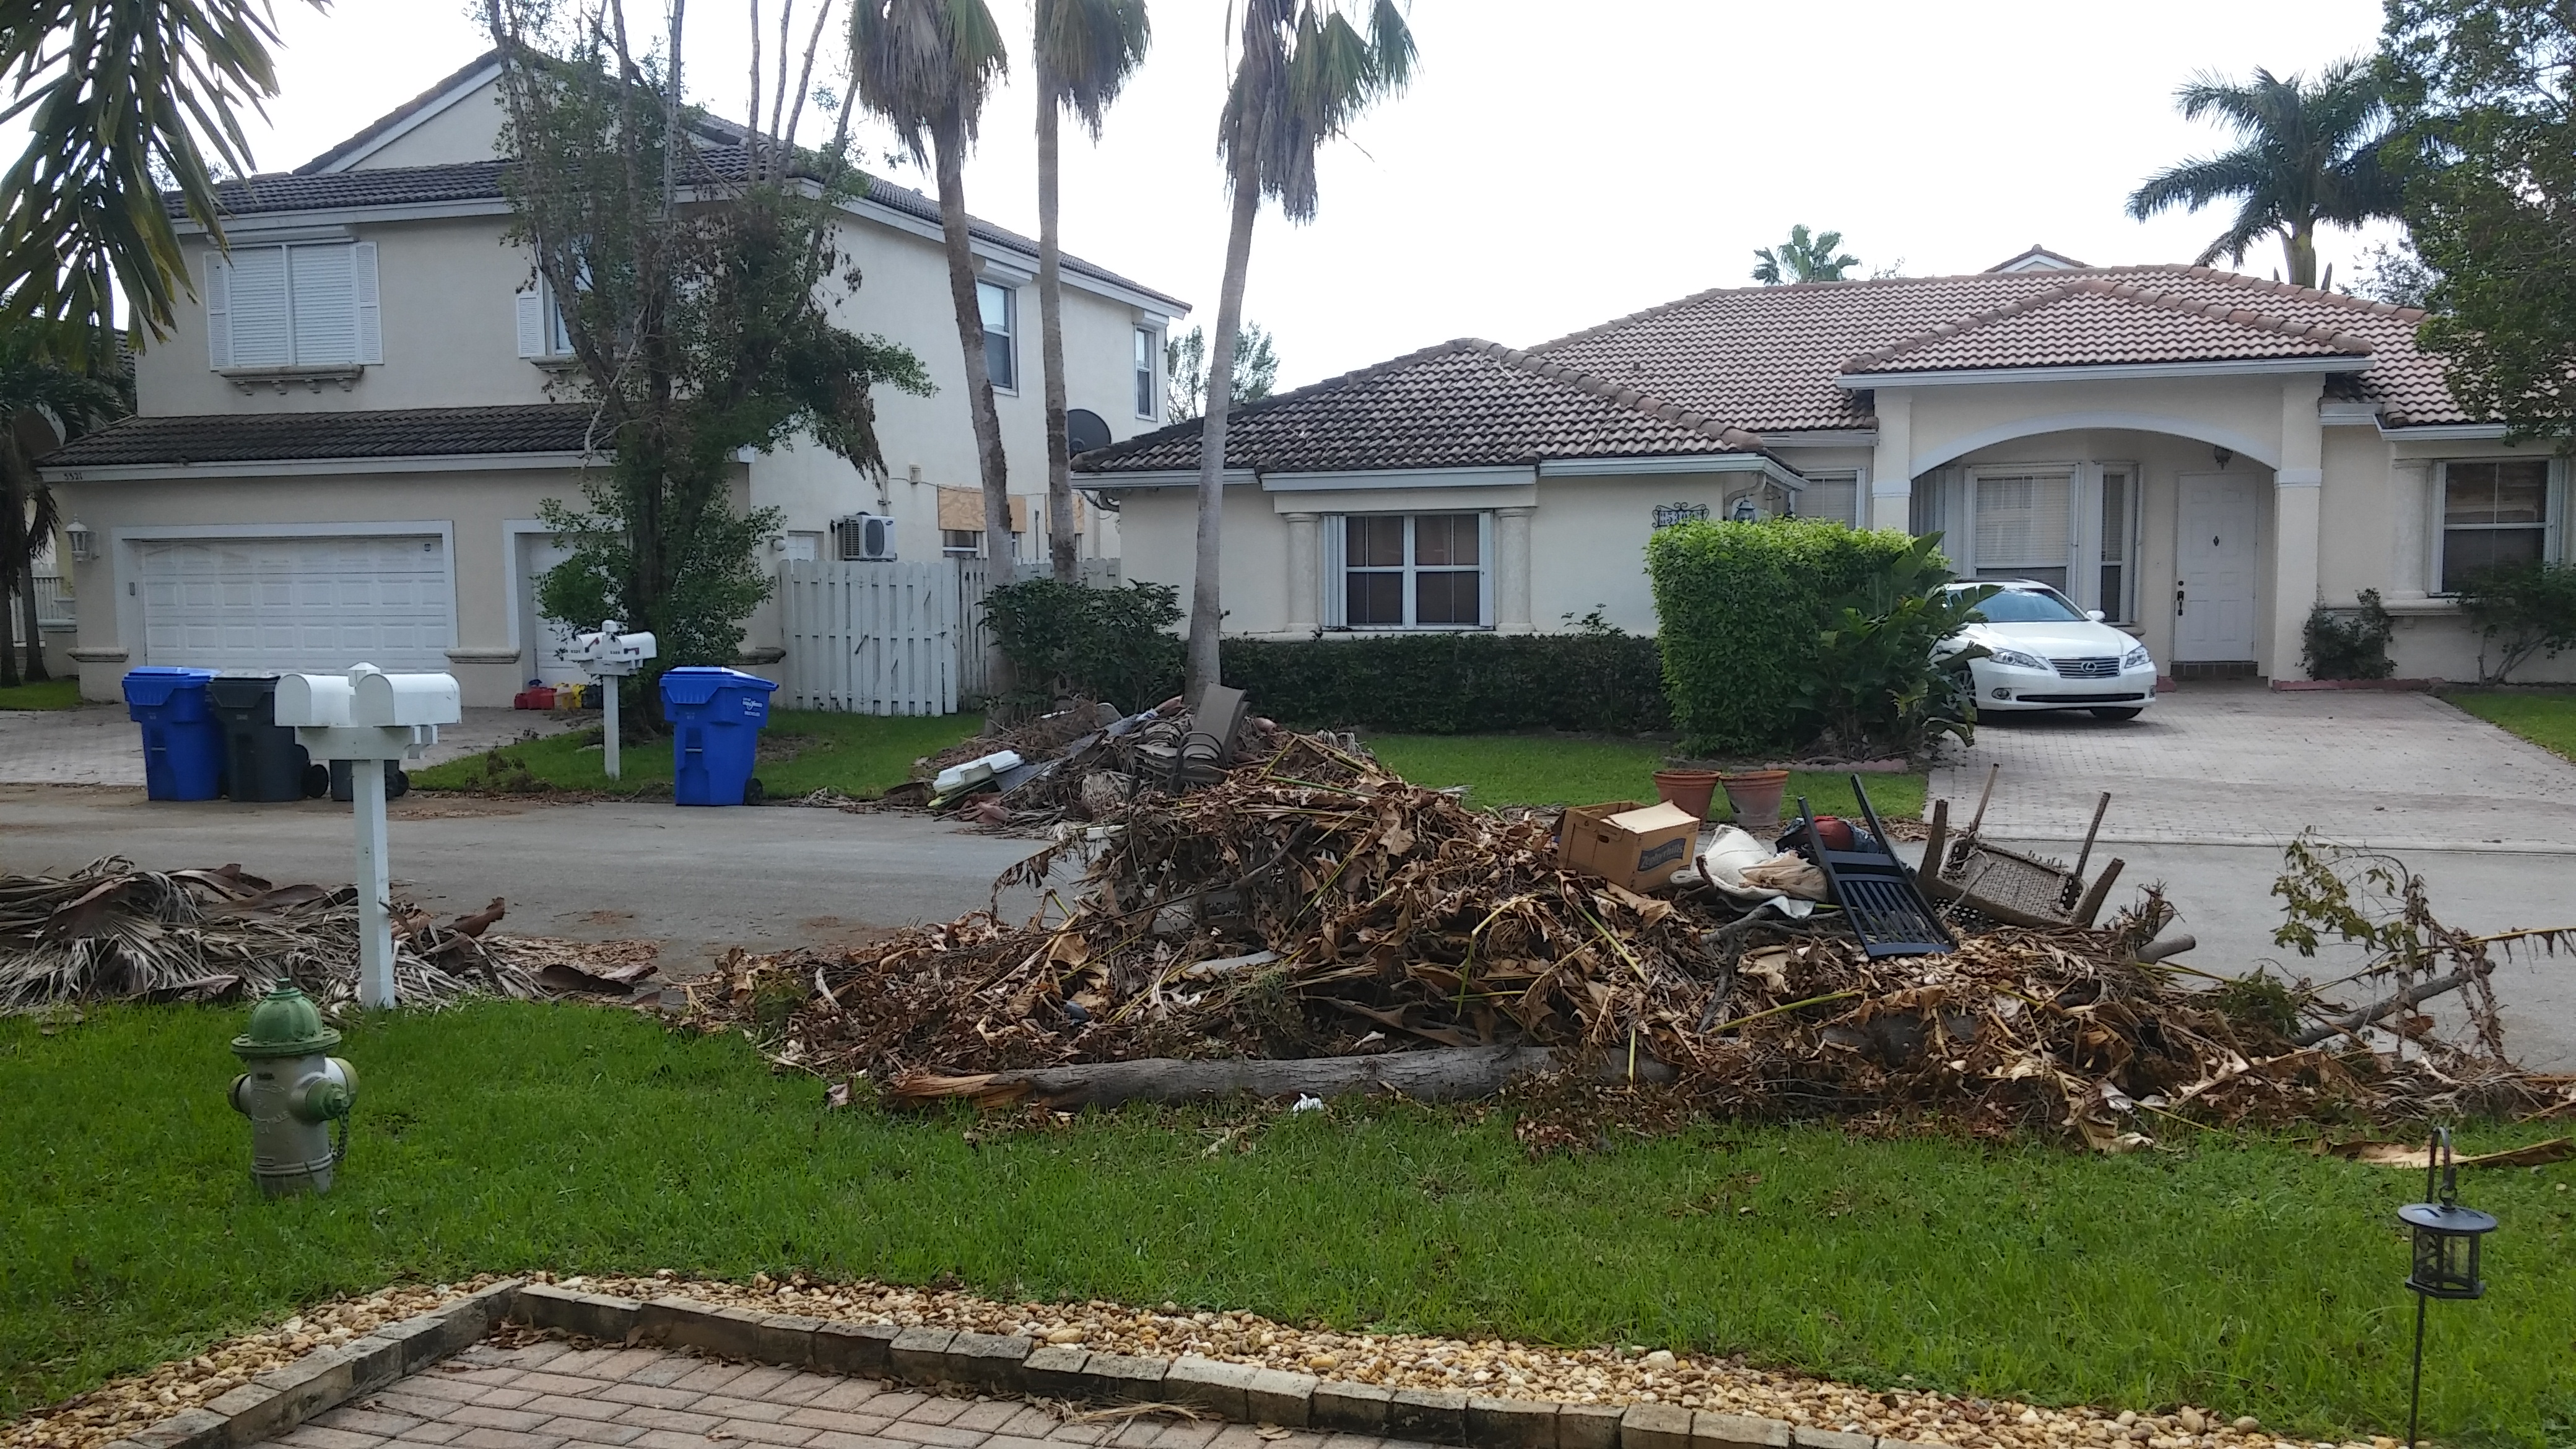 Pile of debris in front of home